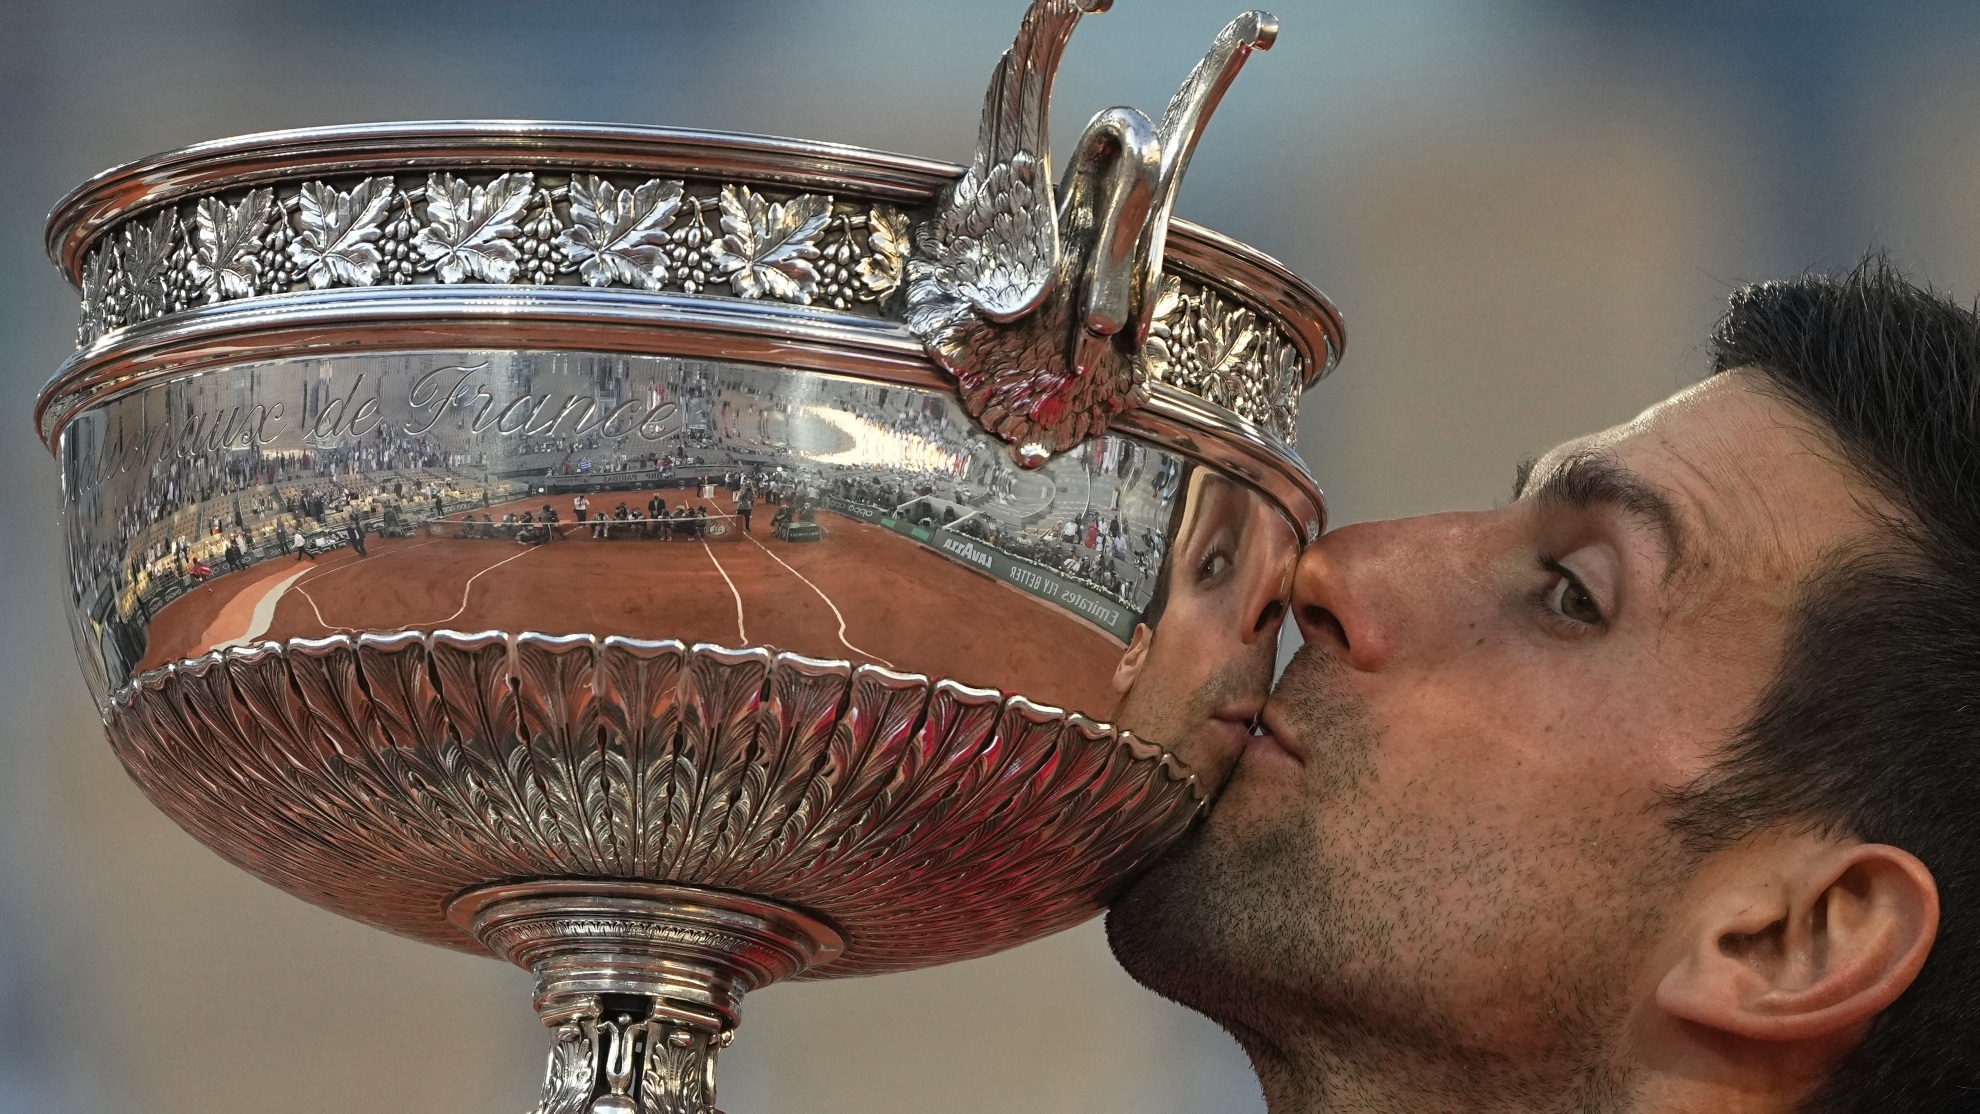 Novak Djokovic kisses the cup of the French Open at the Roland Garros stadium, June 13, 2021 in Paris.